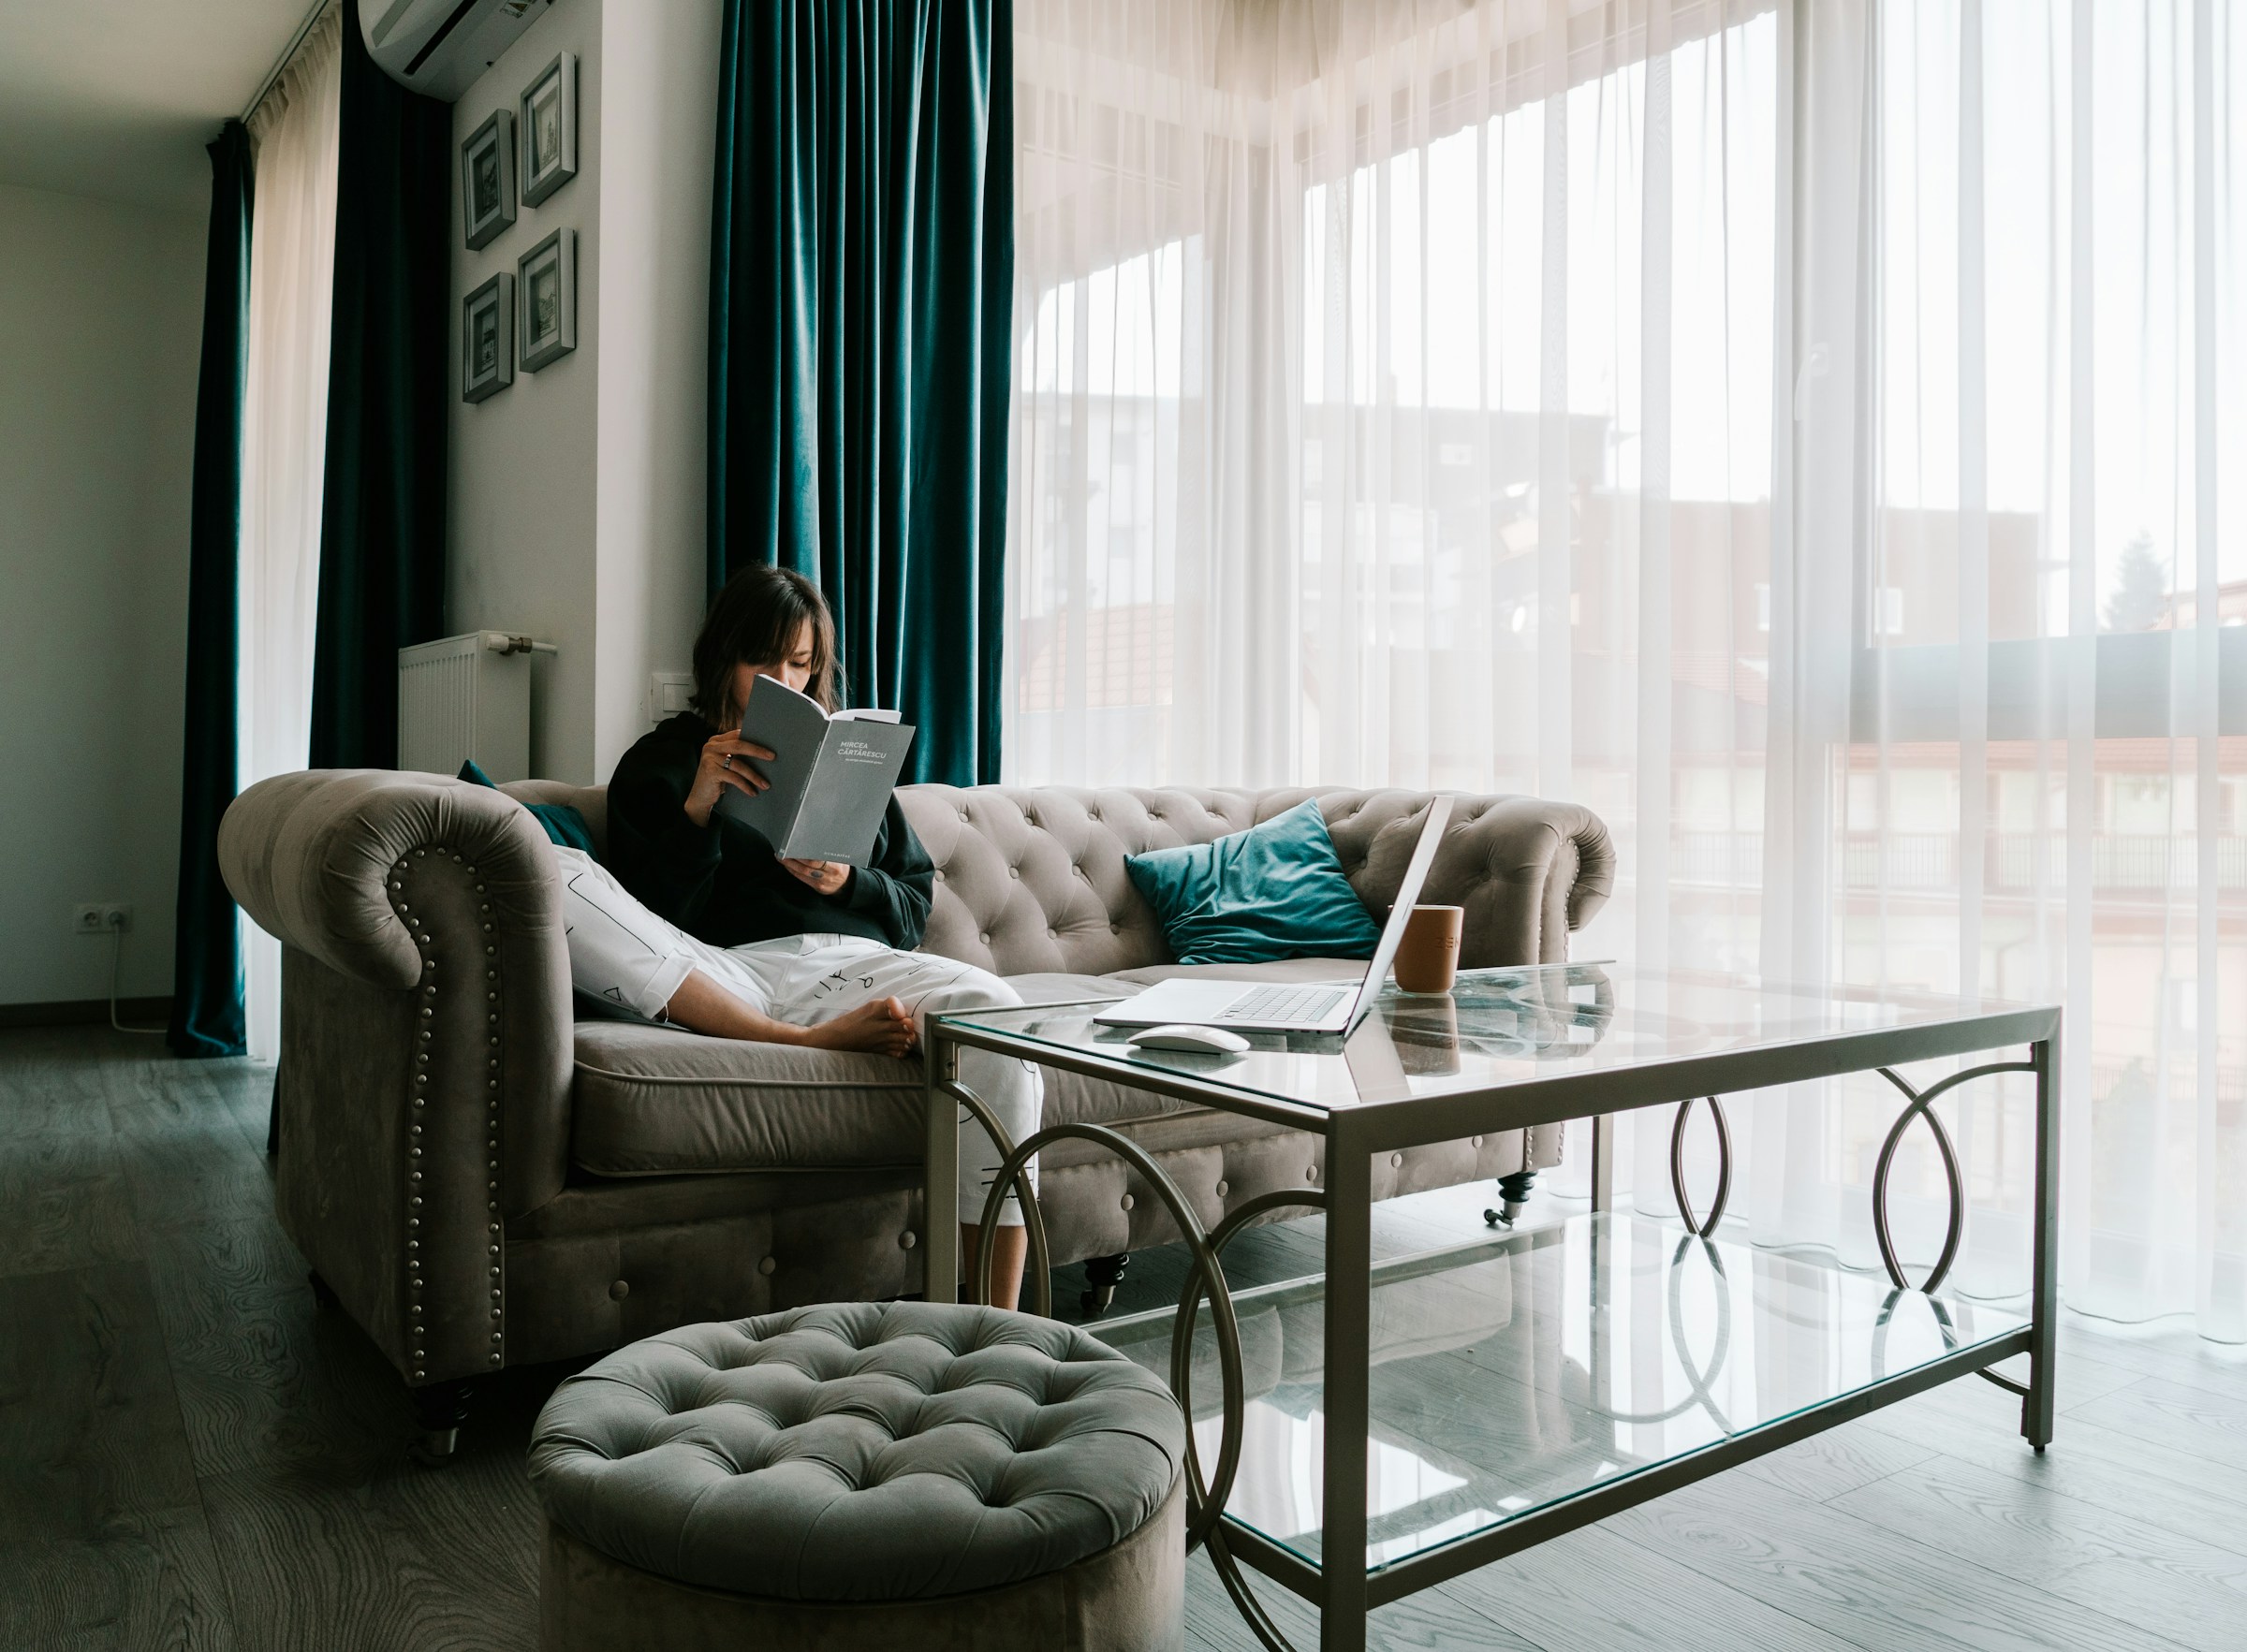 A woman sitting on a couch | Source: Unsplash